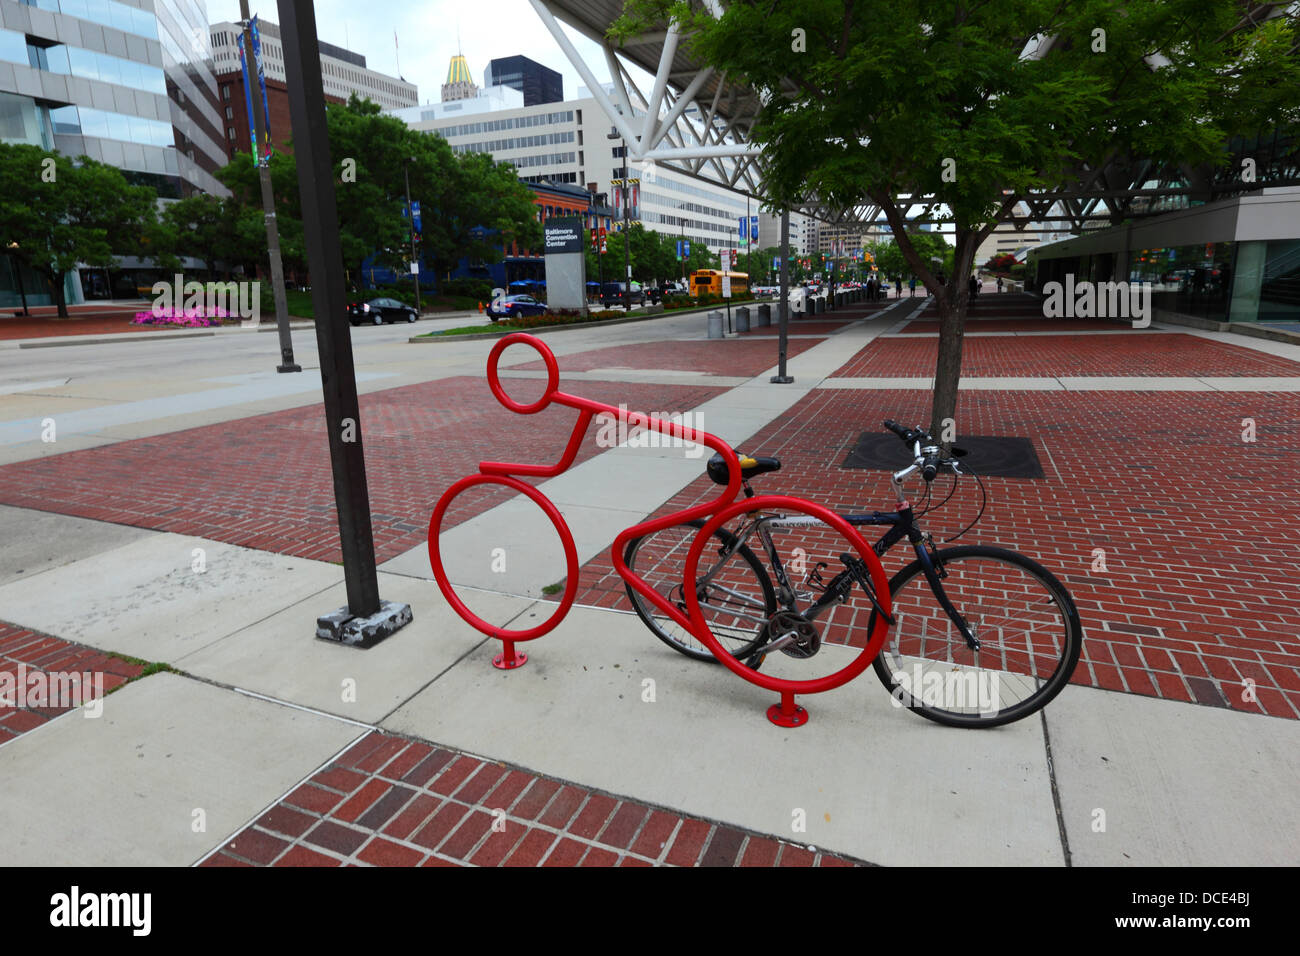 Red steel bicycle shaped cycle rack for securing bikes outside Convention Center building, Baltimore City, Maryland, USA Stock Photo